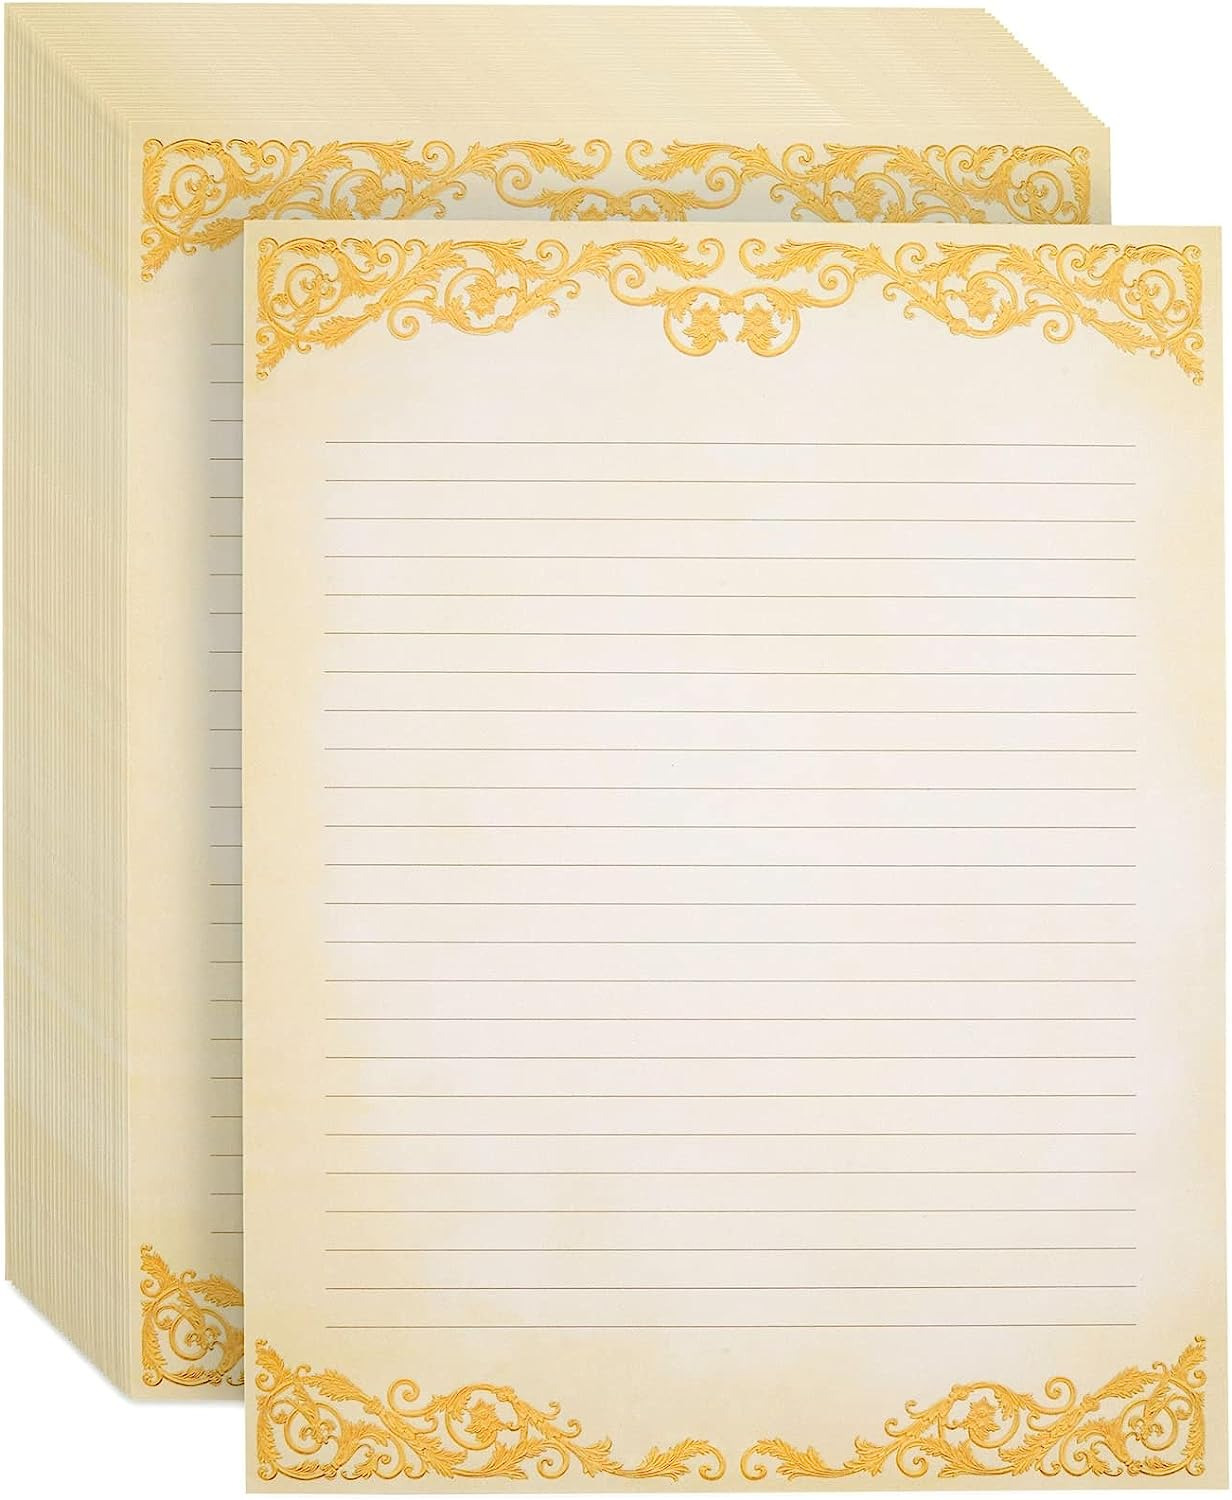 48-Pack Vintage-Style Lined Stationary Paper for Writing Letters, Antique, Old